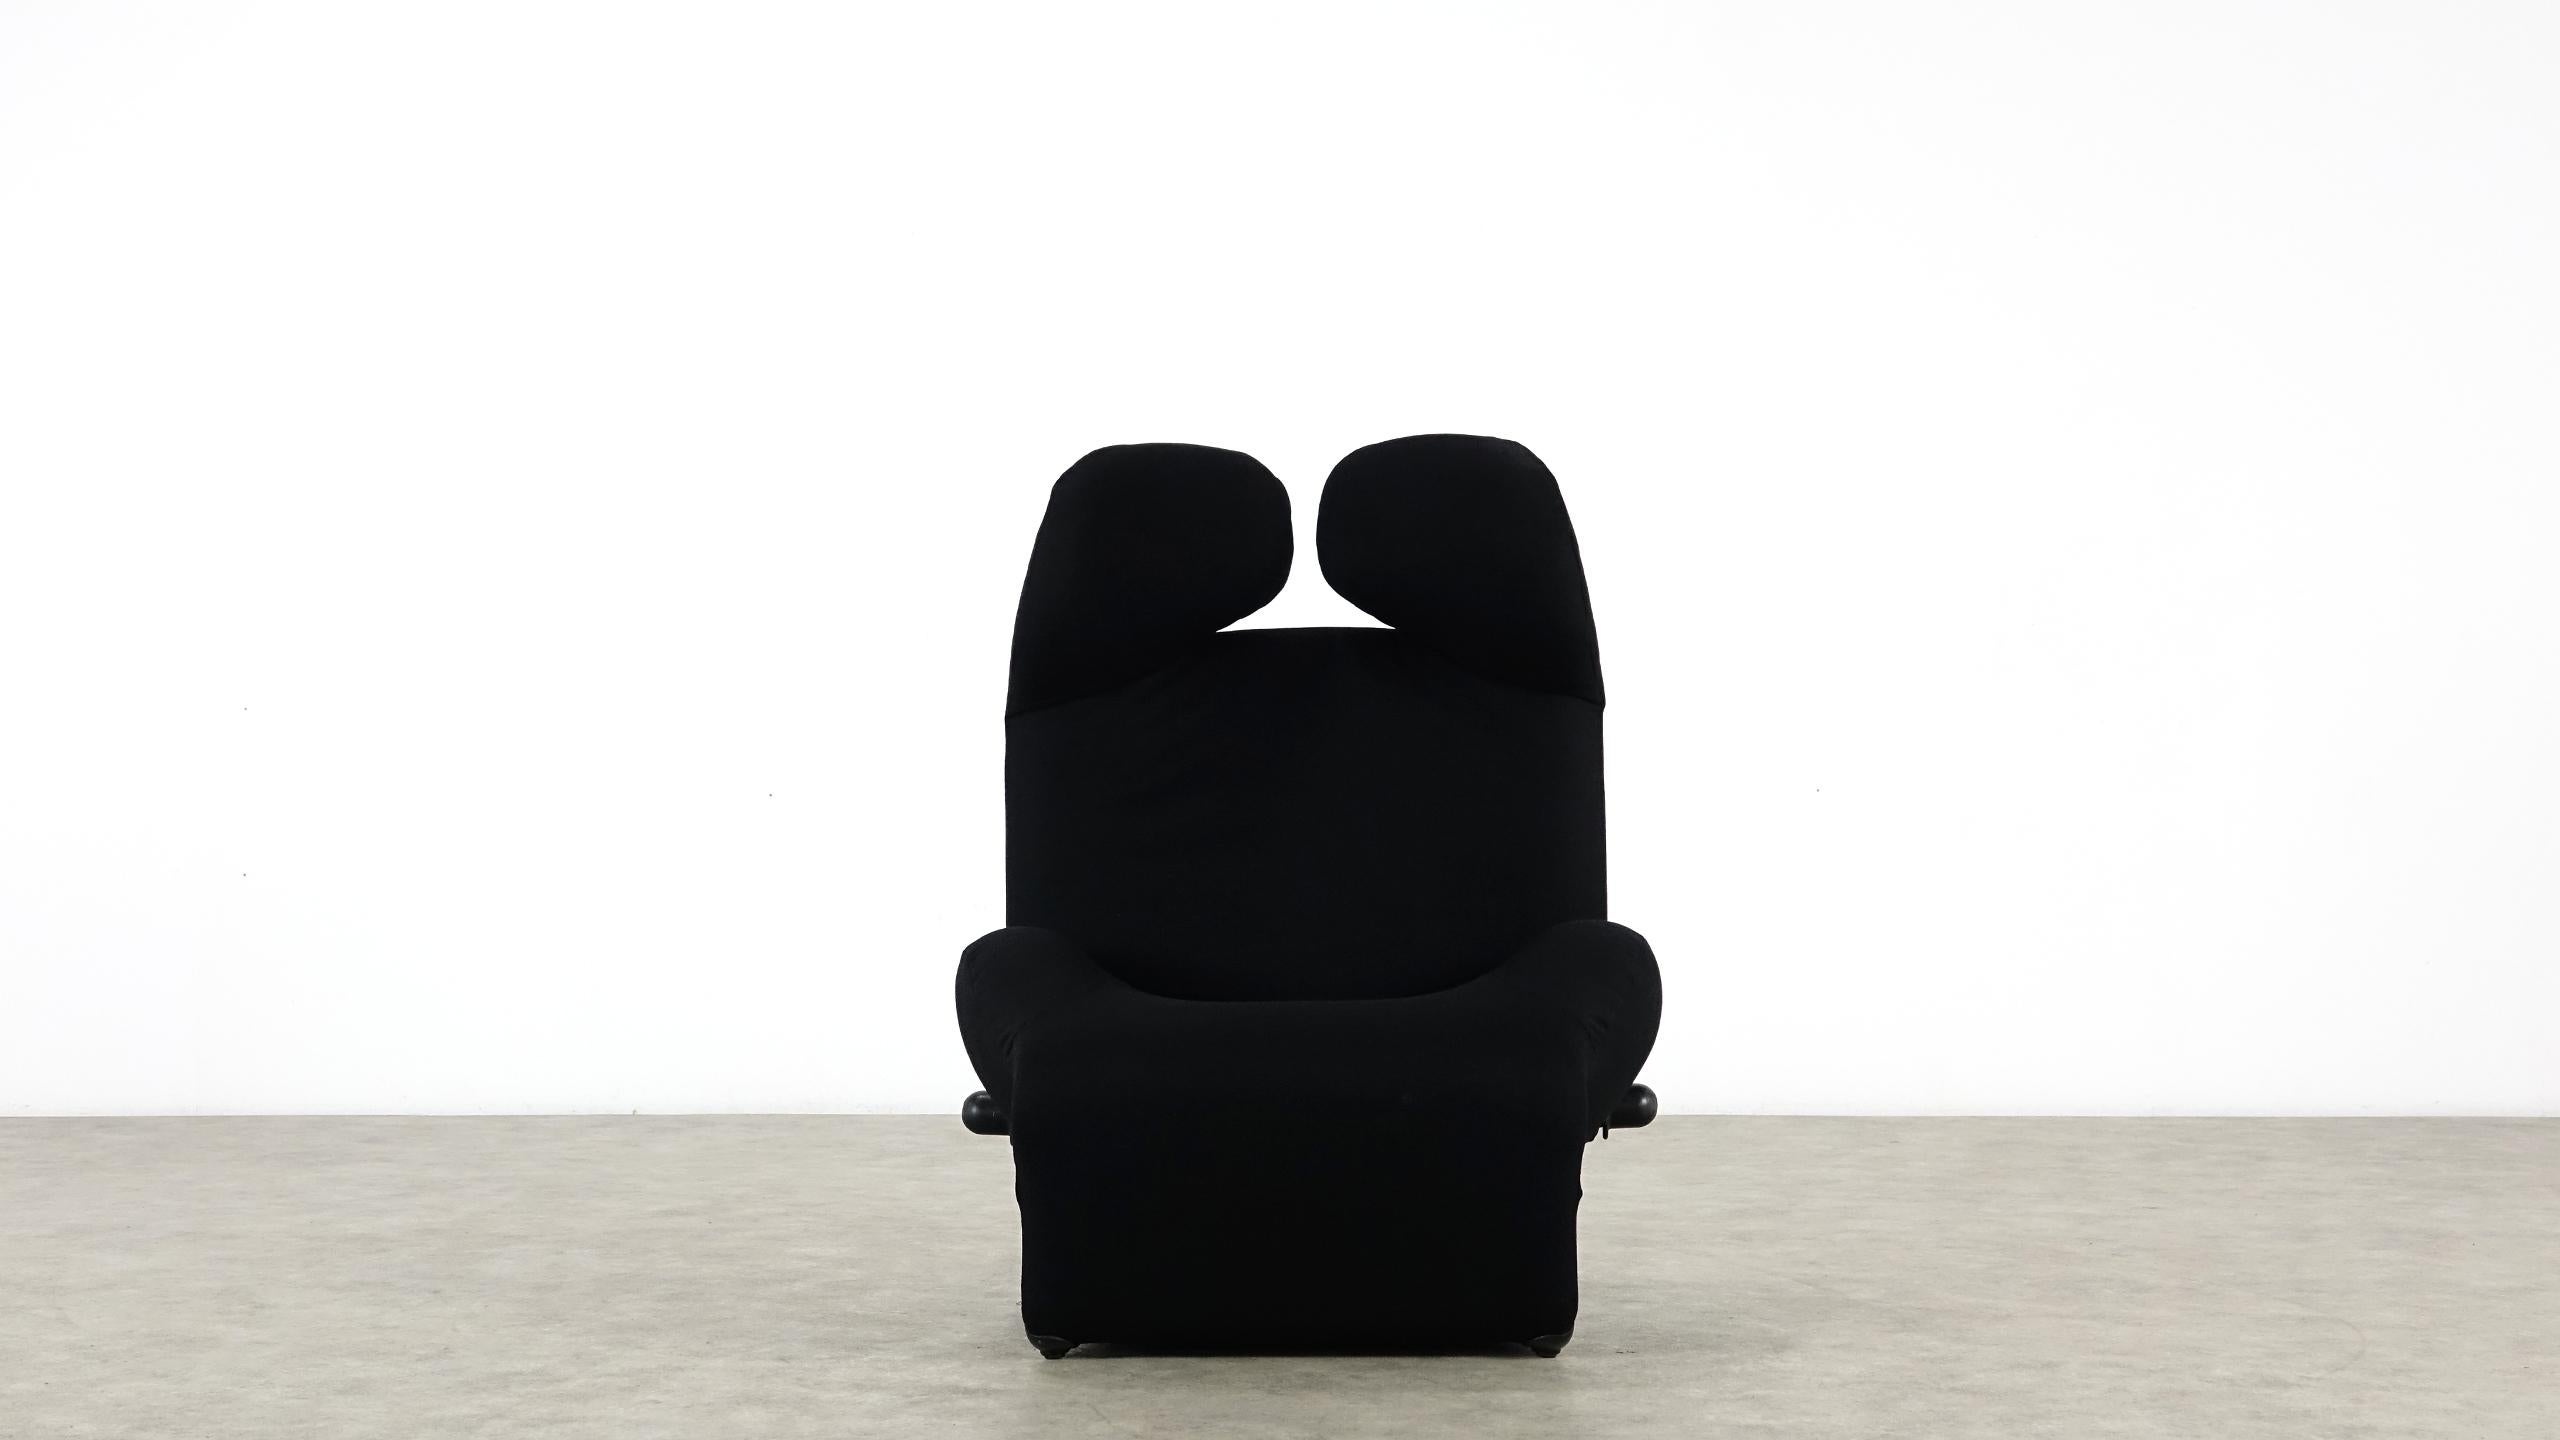 Toshiyuki Kita wink chair for Cassina. Designed 1980. Tubular steel frame with polyurethane upholstery with removable black textile felt cover. The armchair is repeatedly adjustable, by unfolding the foot to use as a lounger.